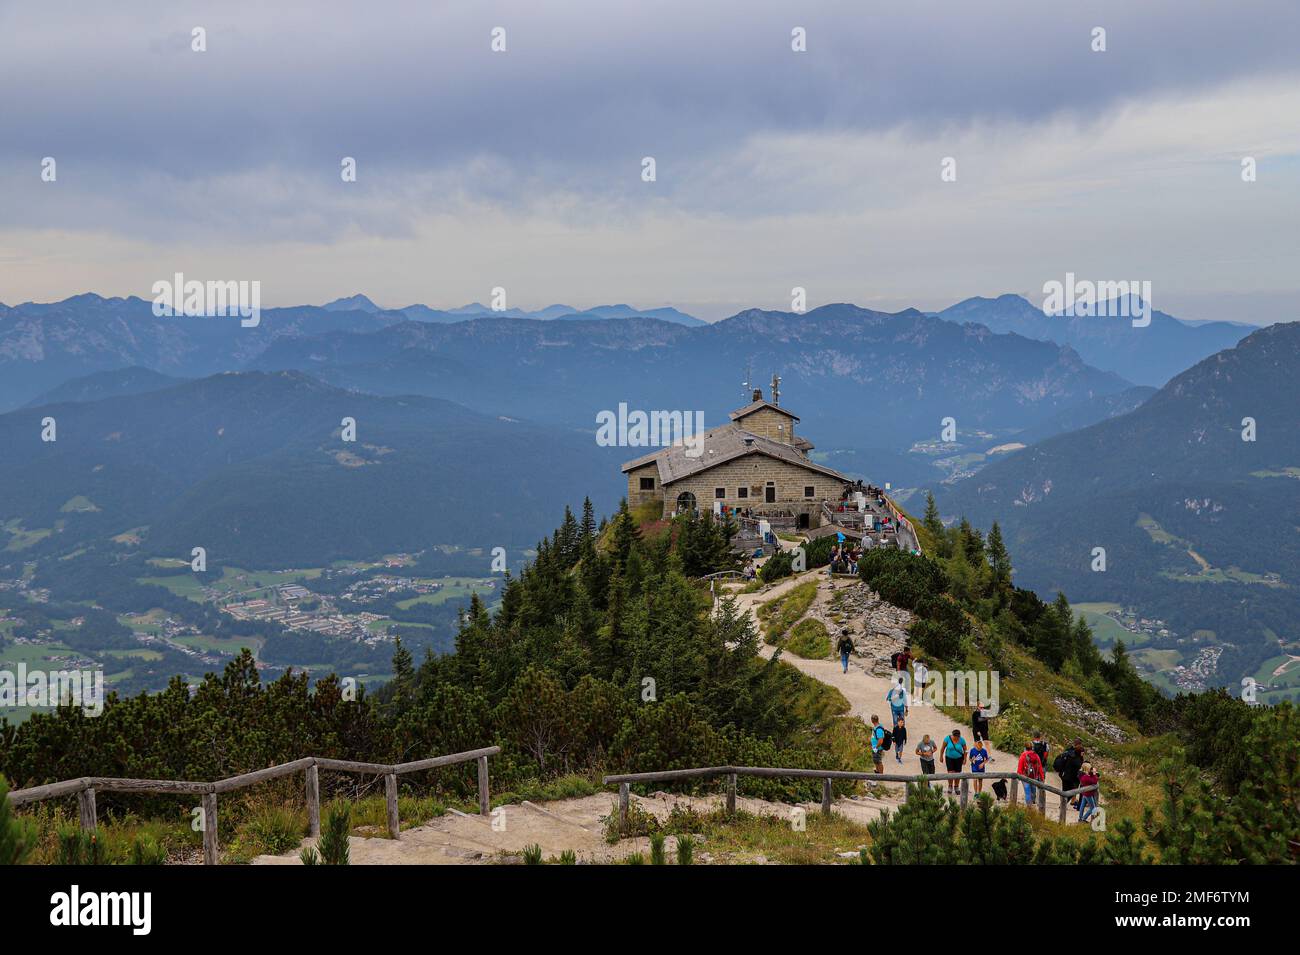 Adolf Hitlers’s Eagles Nest, a former Nazi diplomatic house resting on top of Kehlstein mountain, hosts U.S. Army and civilian tourists in Berchtesgaden, Germany, Aug. 17-19, 2022. The staff ride allowed Soldiers to walk the same terrain World War II Soldiers walked over 75 years ago as they seized the famed Nazi structure Hitler visited only 14 times. Stock Photo